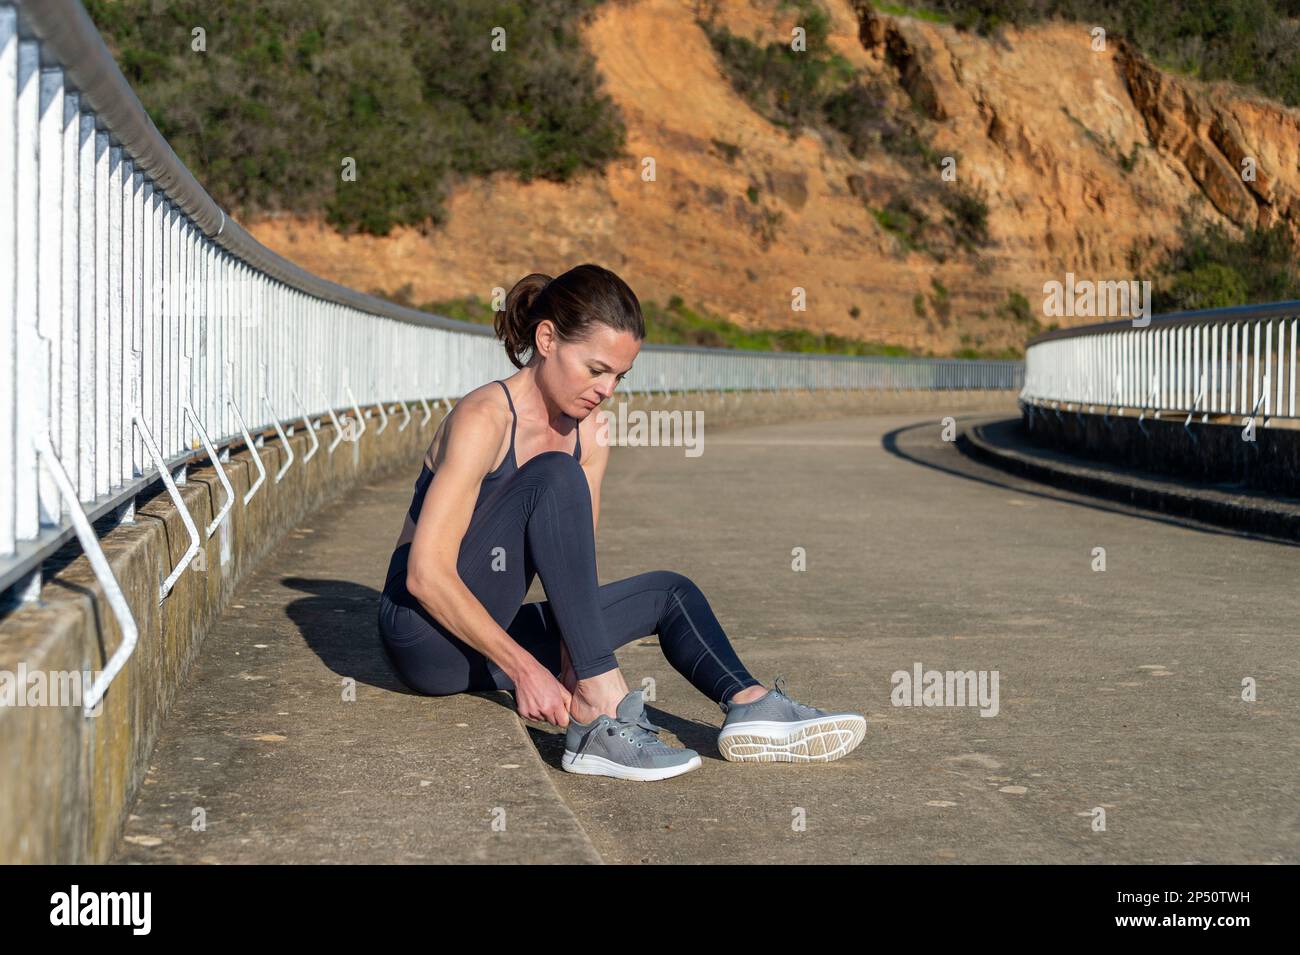 Sporty fit woman puttin on her running shoes outside. Preperation for running and jogging. Stock Photo